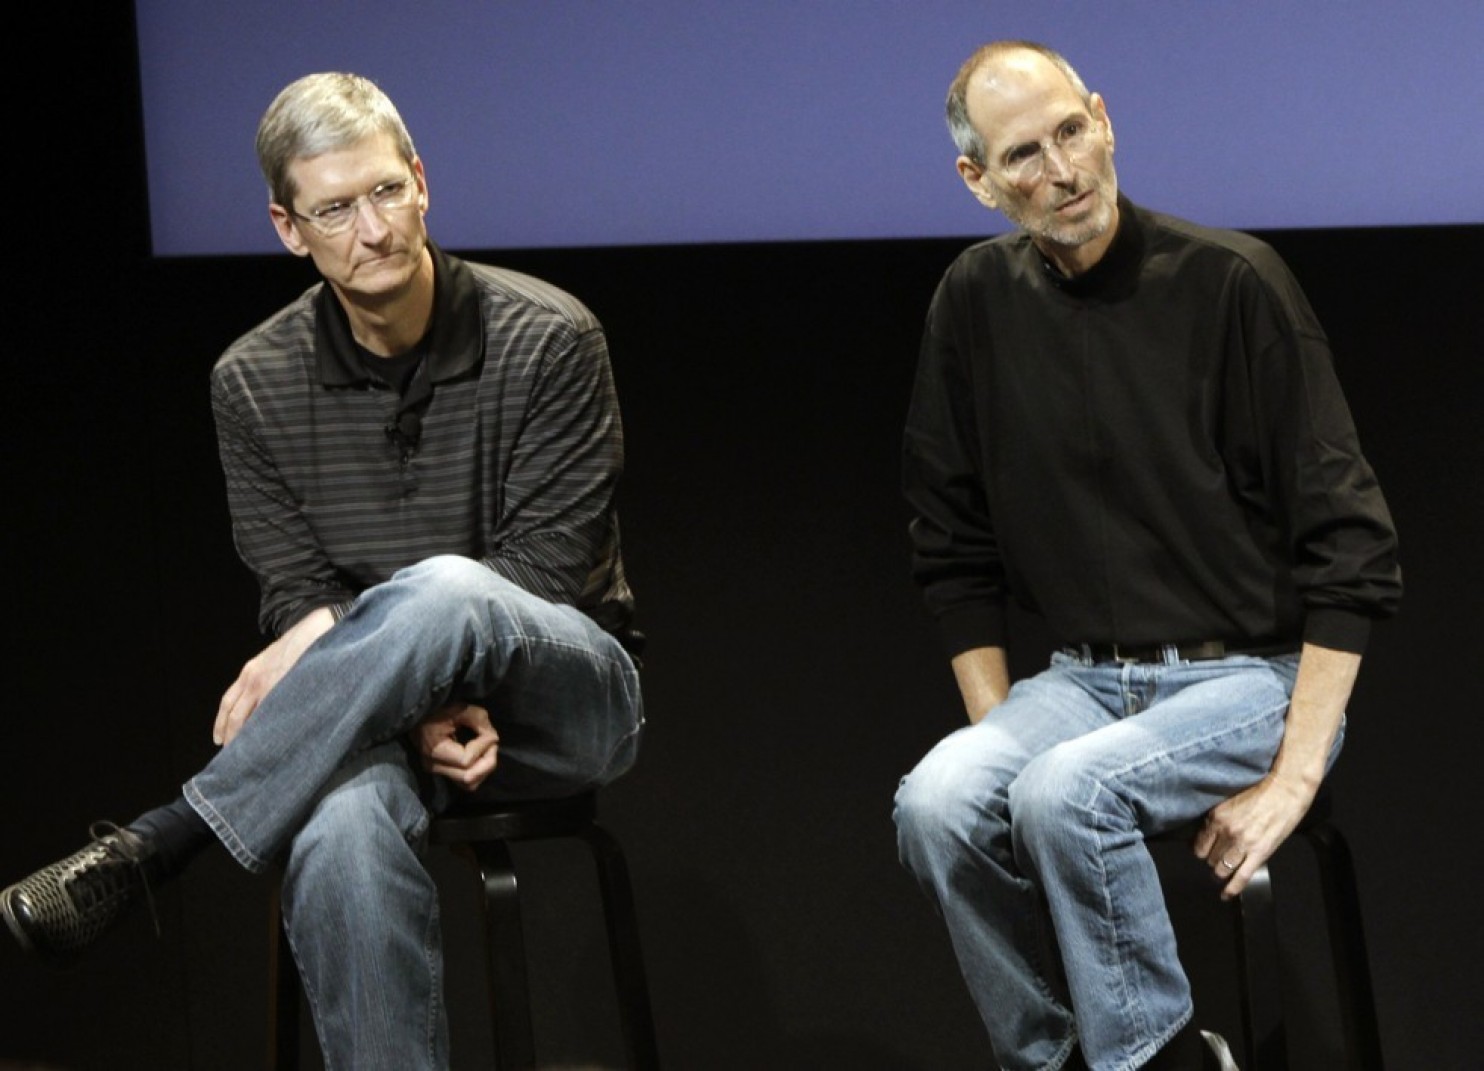 Tim Cook: How Steve Jobs changed the world